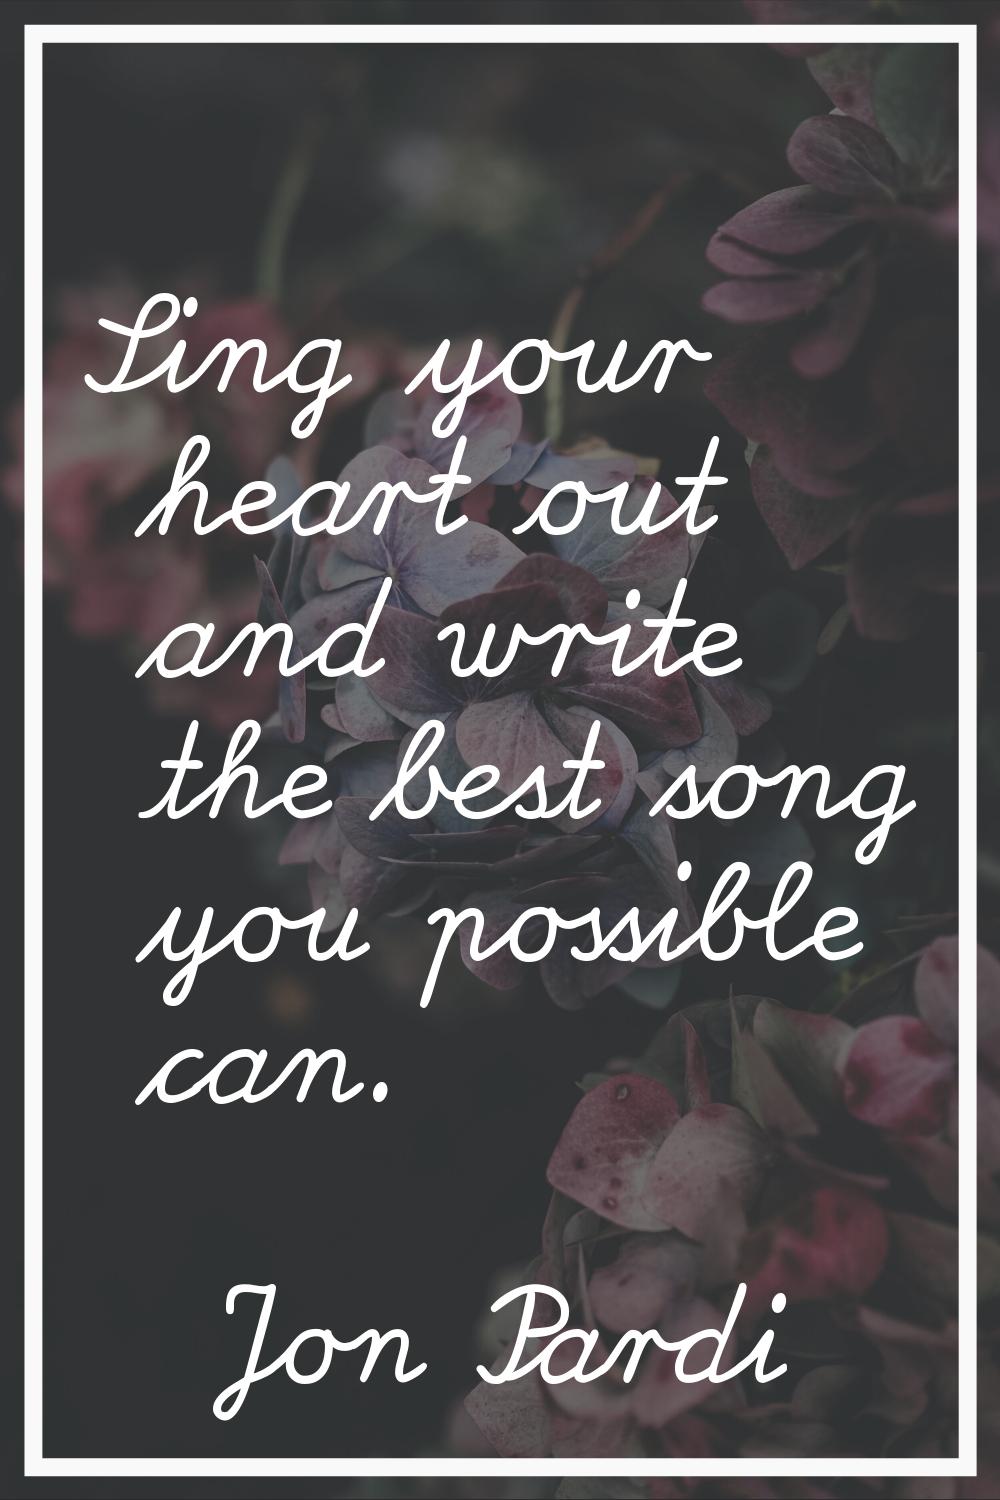 Sing your heart out and write the best song you possible can.